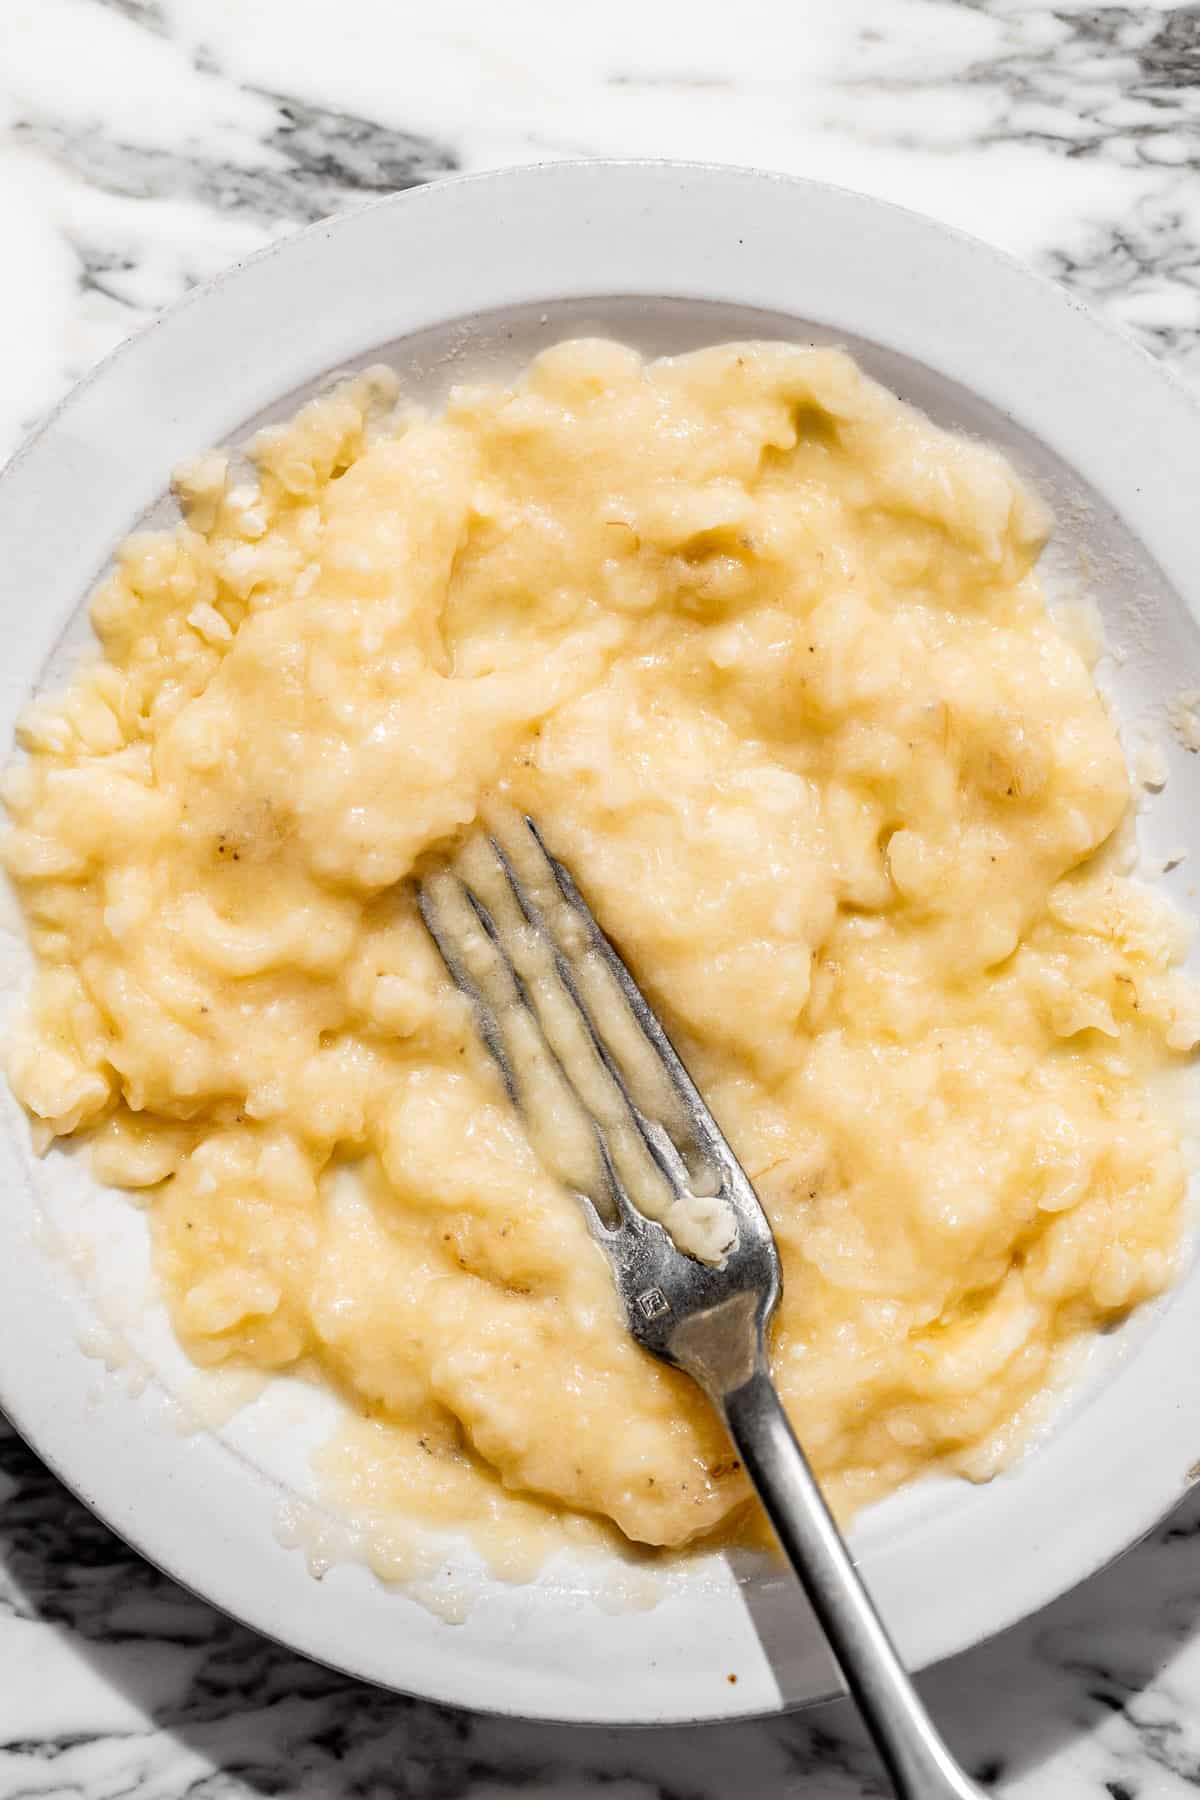 mashed bananas on a white plate.